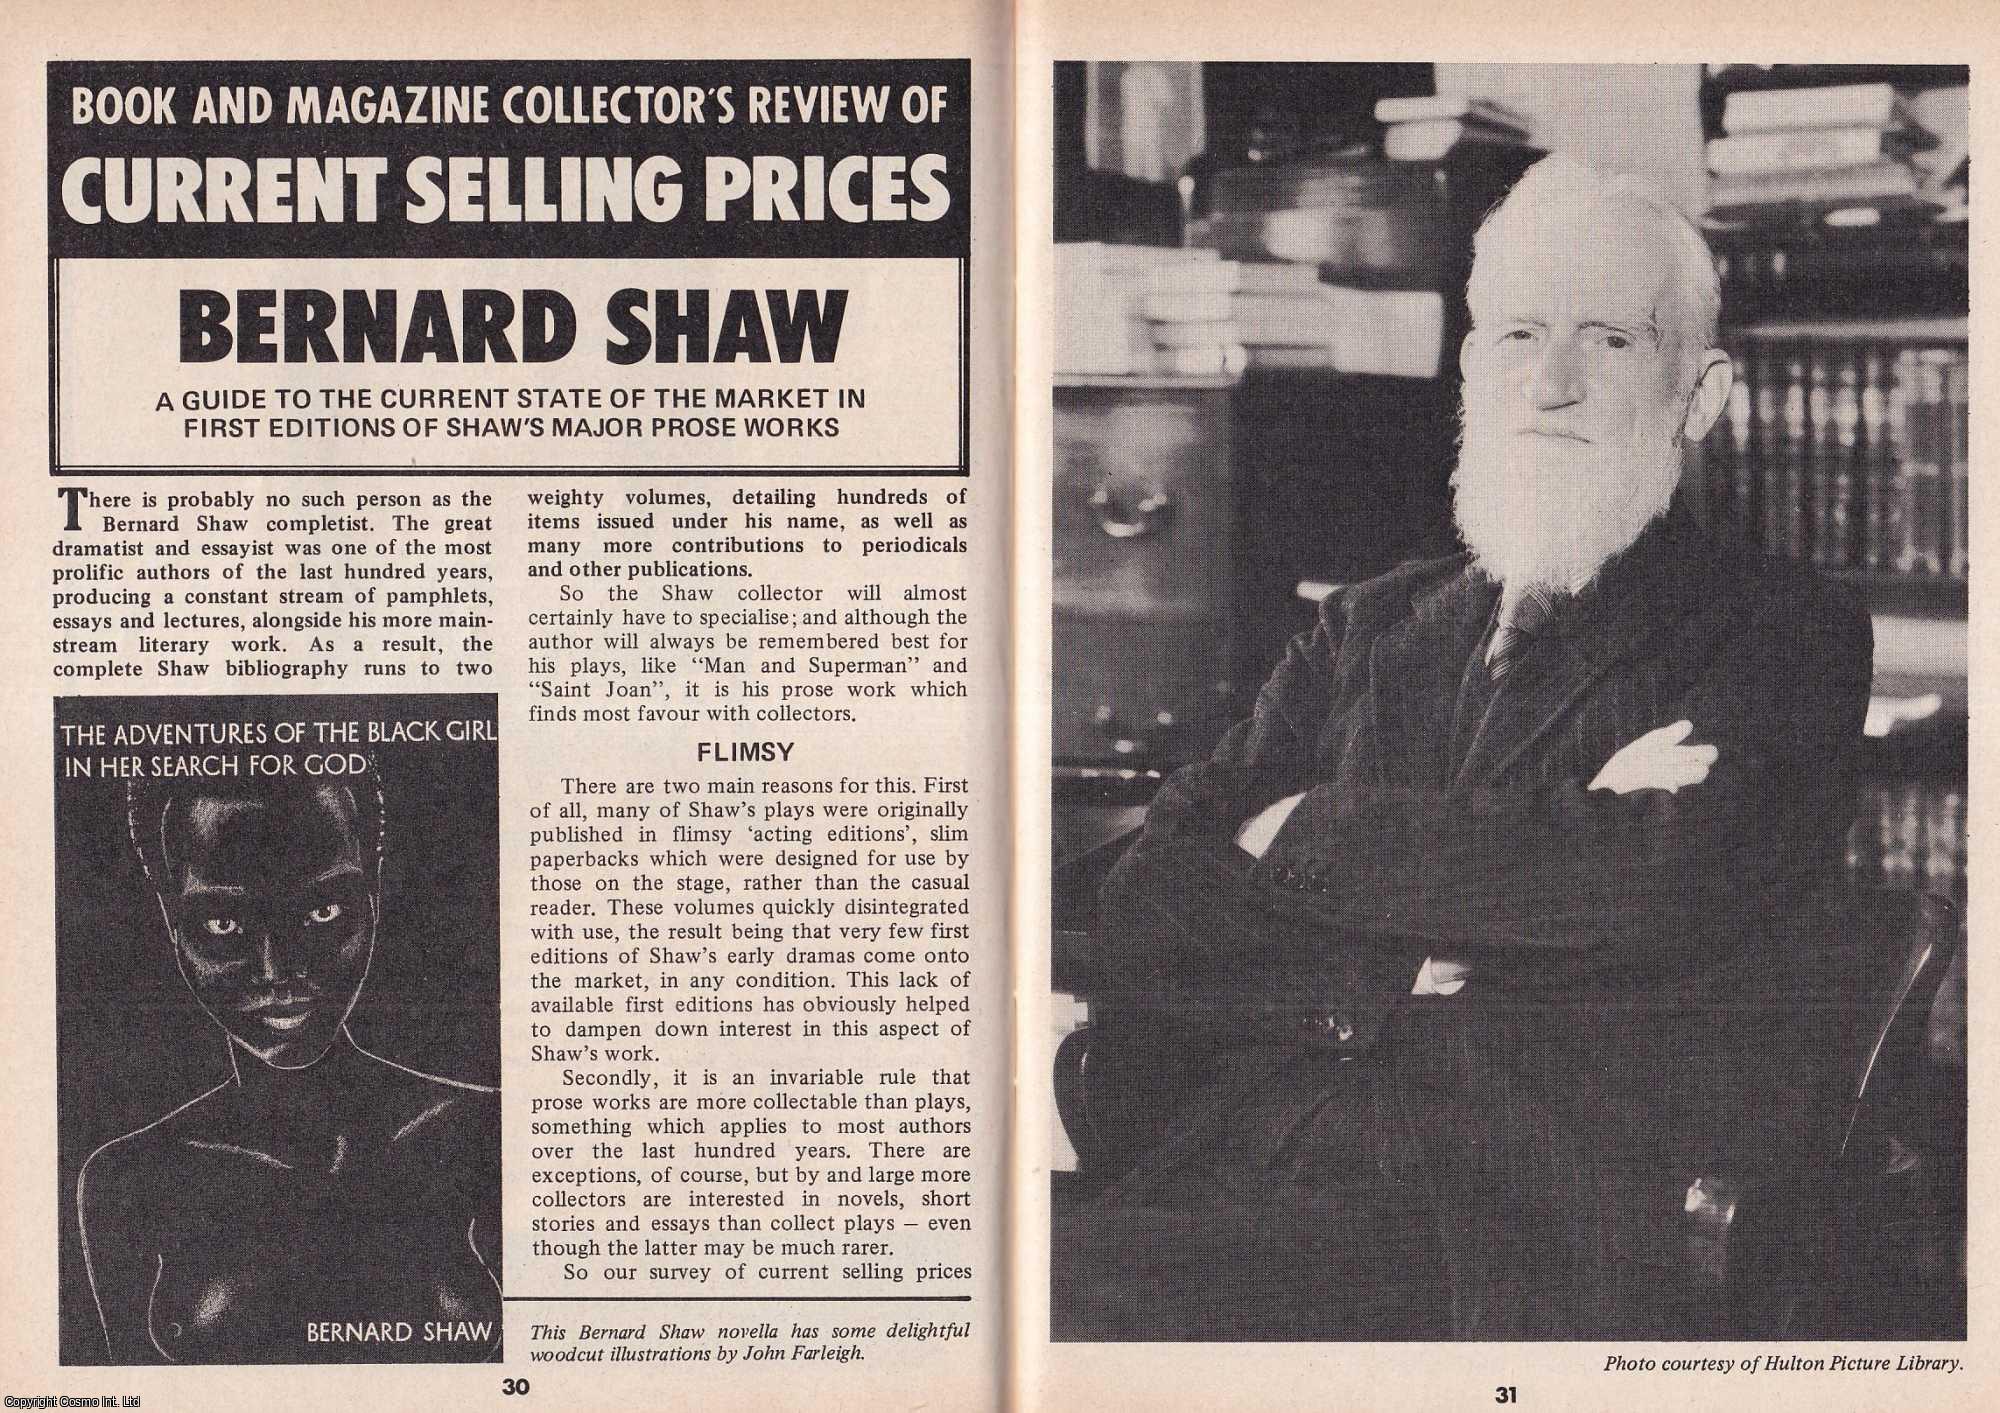 Unstated - Bernard Shaw : A Guide to The Current State of The Market in First Editions of Shaw's Major Prose Works. This is an original article separated from an issue of The Book & Magazine Collector publication.